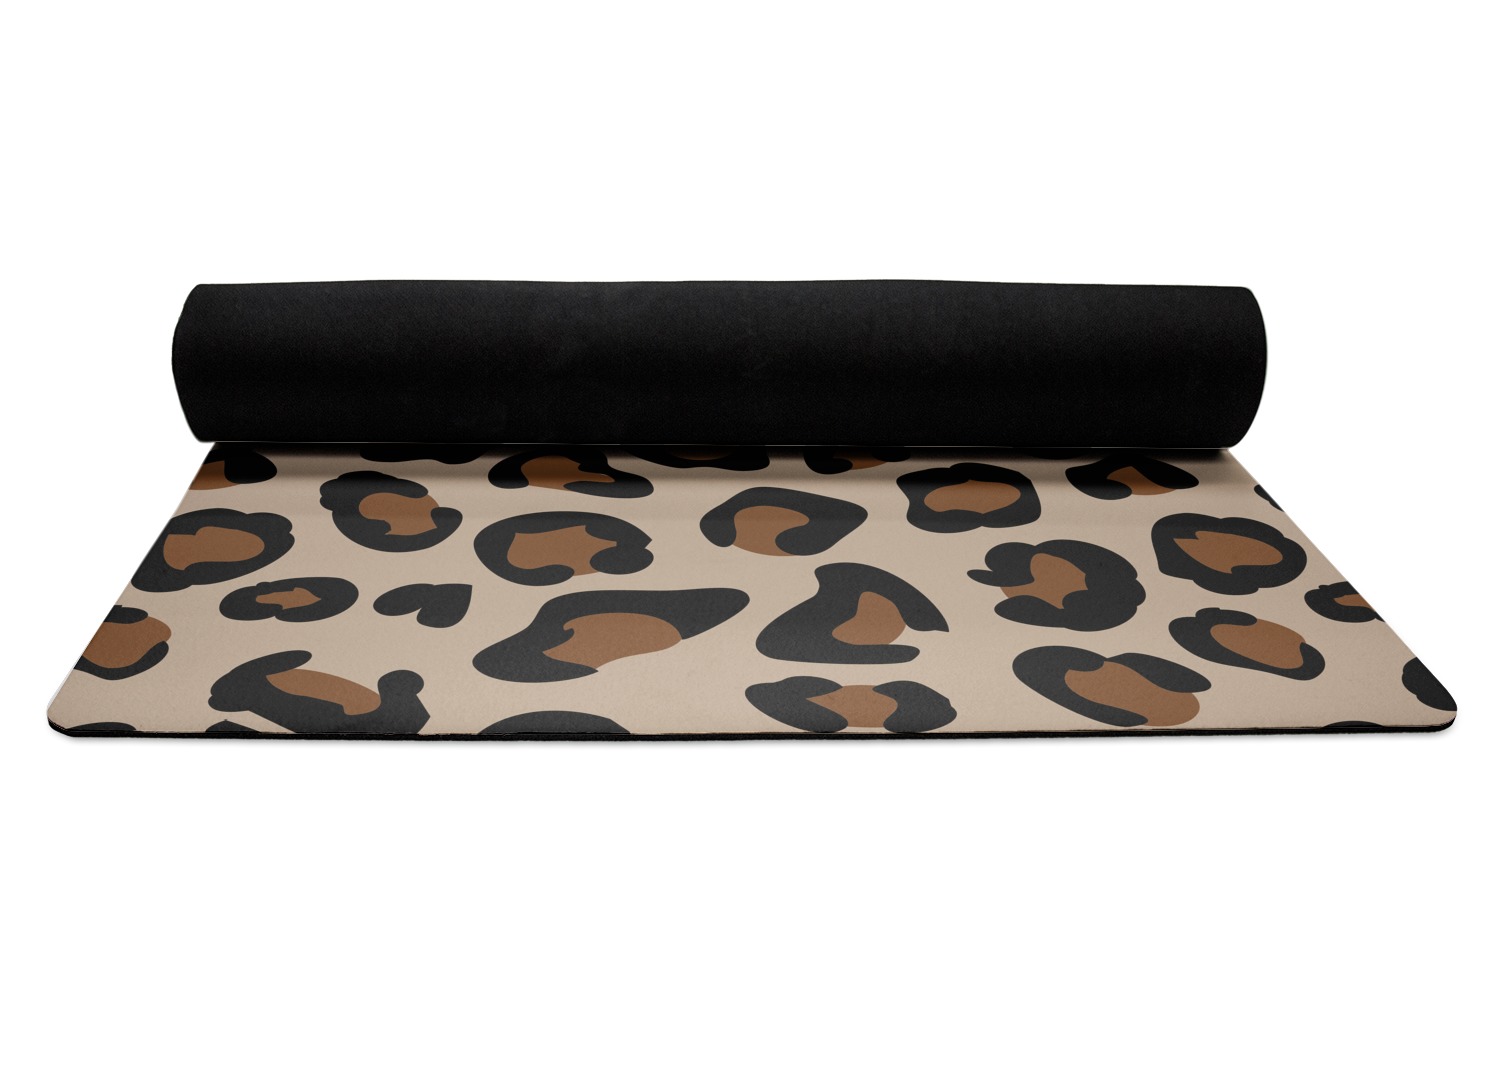 https://www.youcustomizeit.com/common/MAKE/65163/Granite-Leopard-Yoga-Mat-Rolled-up-Black-Rubber-Backing.jpg?lm=1555494771